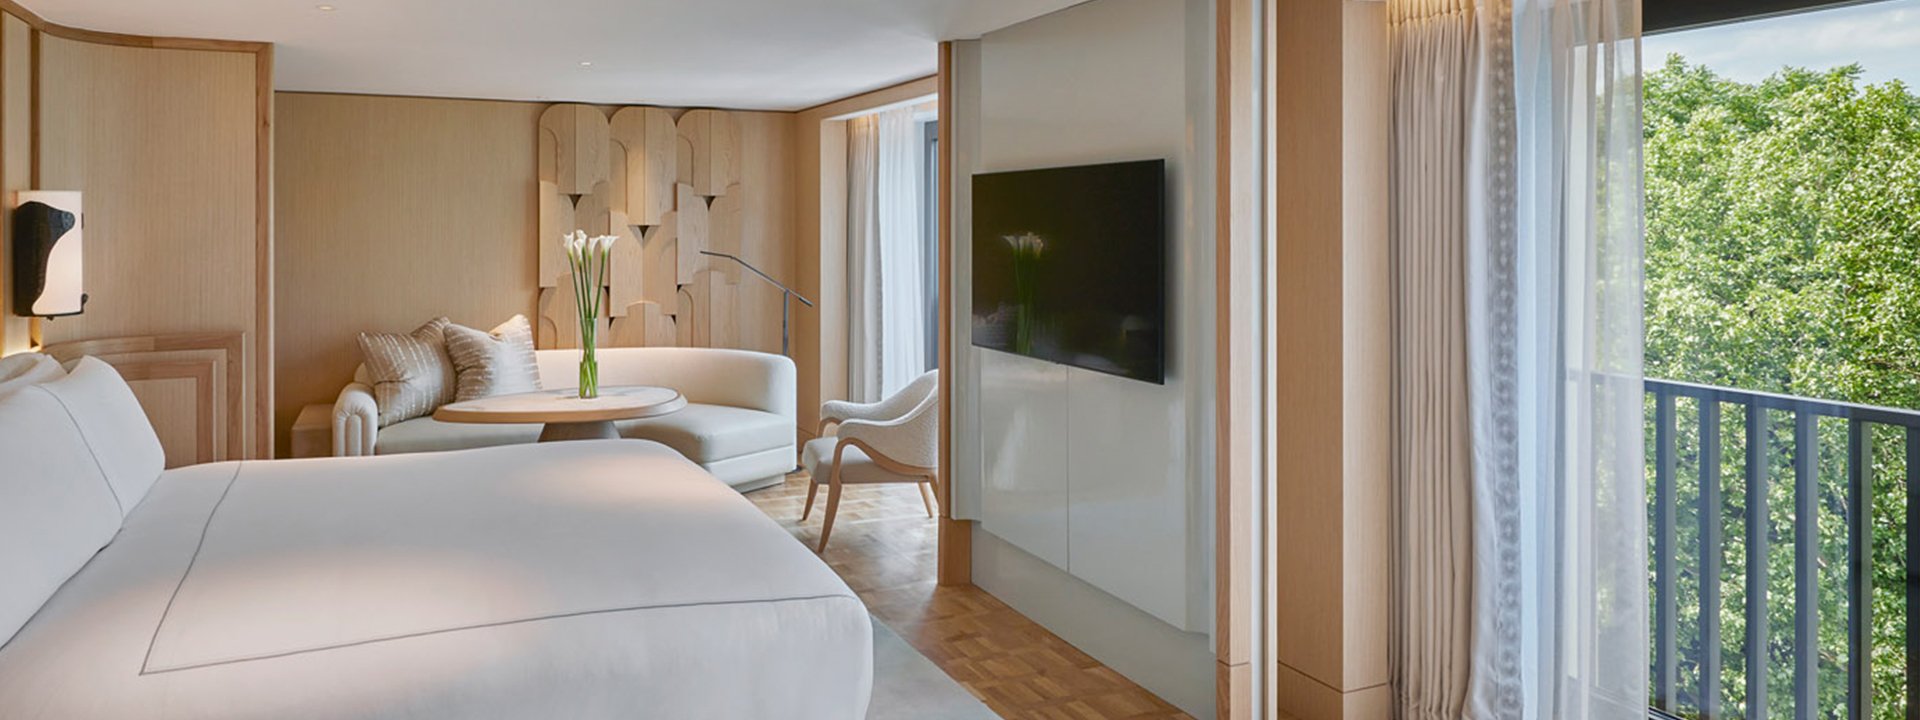 Knightsbridge Pavilion Penthouse - view of the bedroom with bed, sofa in the background, TV and windows on the right handside.